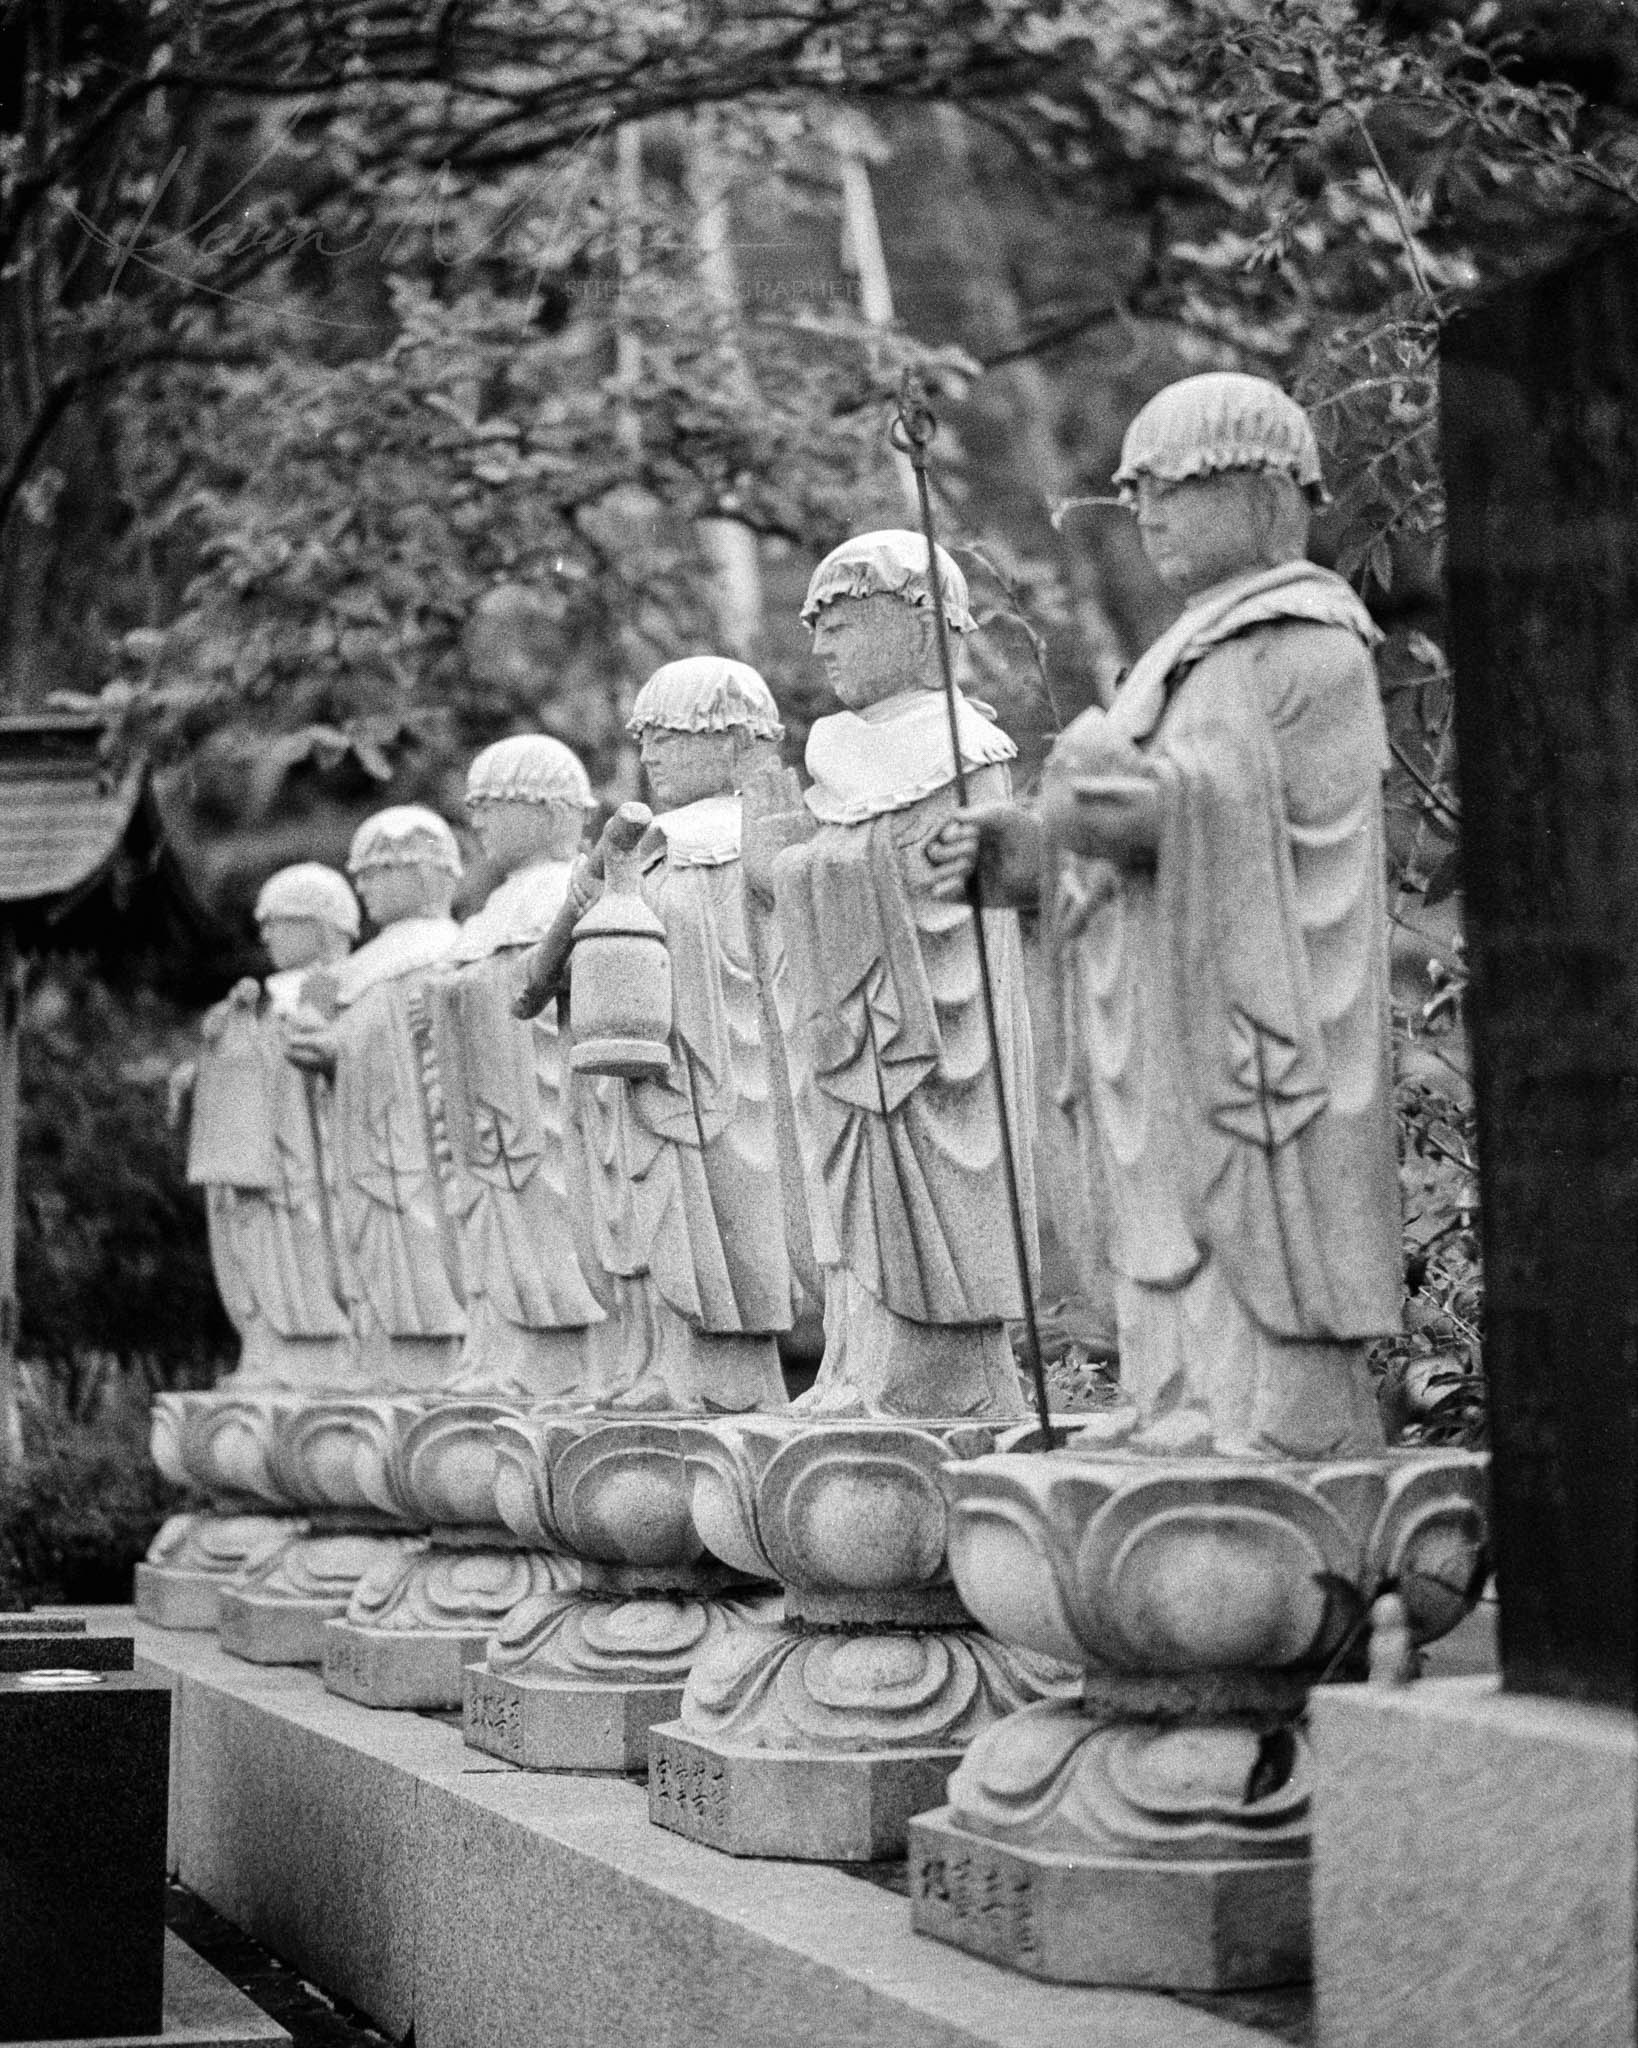 Row of traditional East Asian guardian statues in a timeless black and white setting.